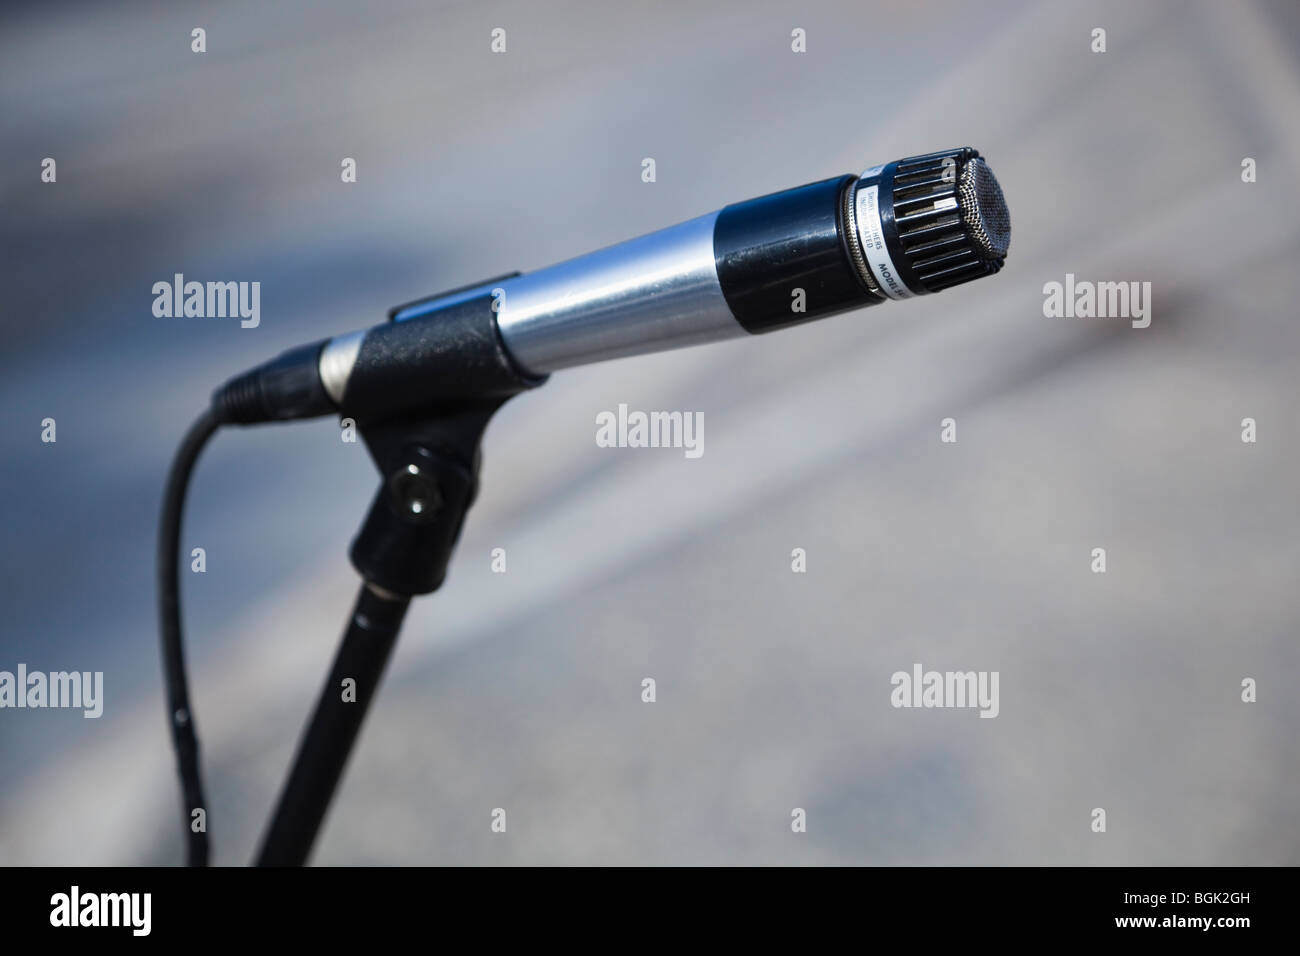 Microphone on stand Stock Photo